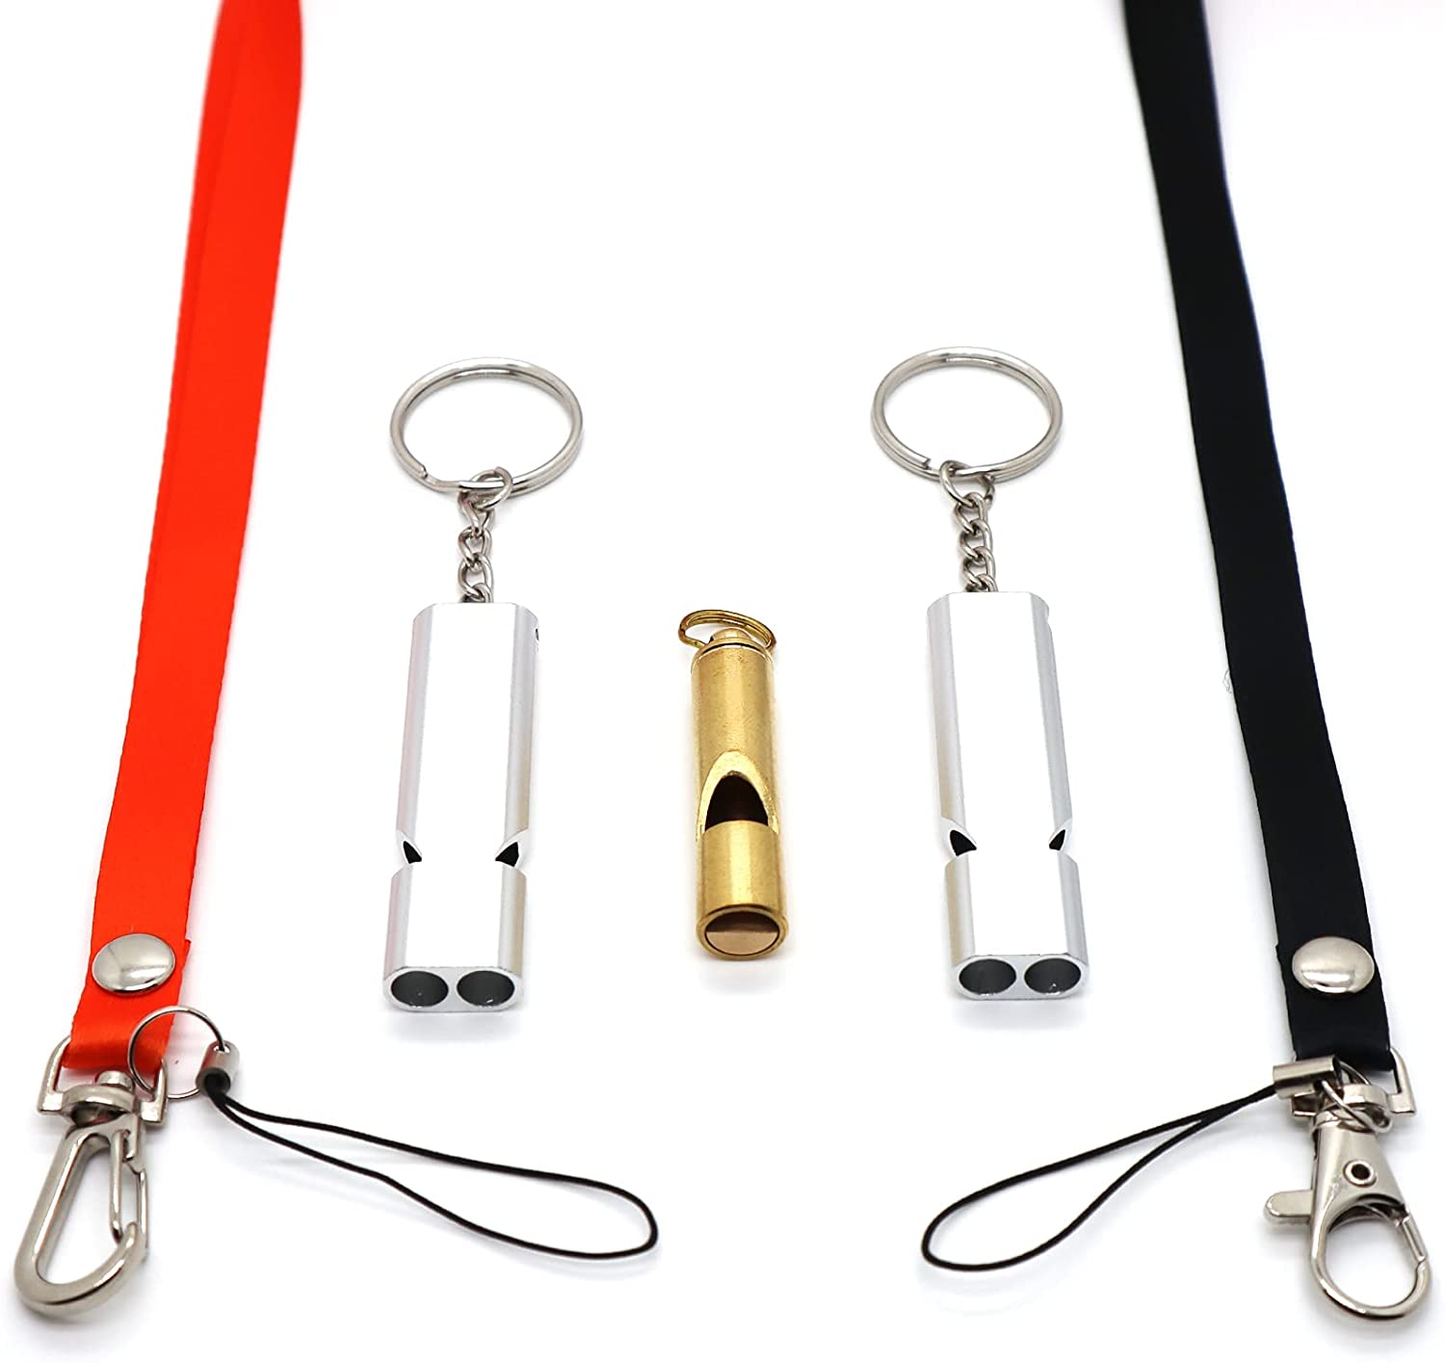 Whistles with Lanyard Emergency Whistle Brass Aluminum Loud Alarm for Safety Camping Hiking Hunting Fishing Dog Training Coach Referee Police Women Elder